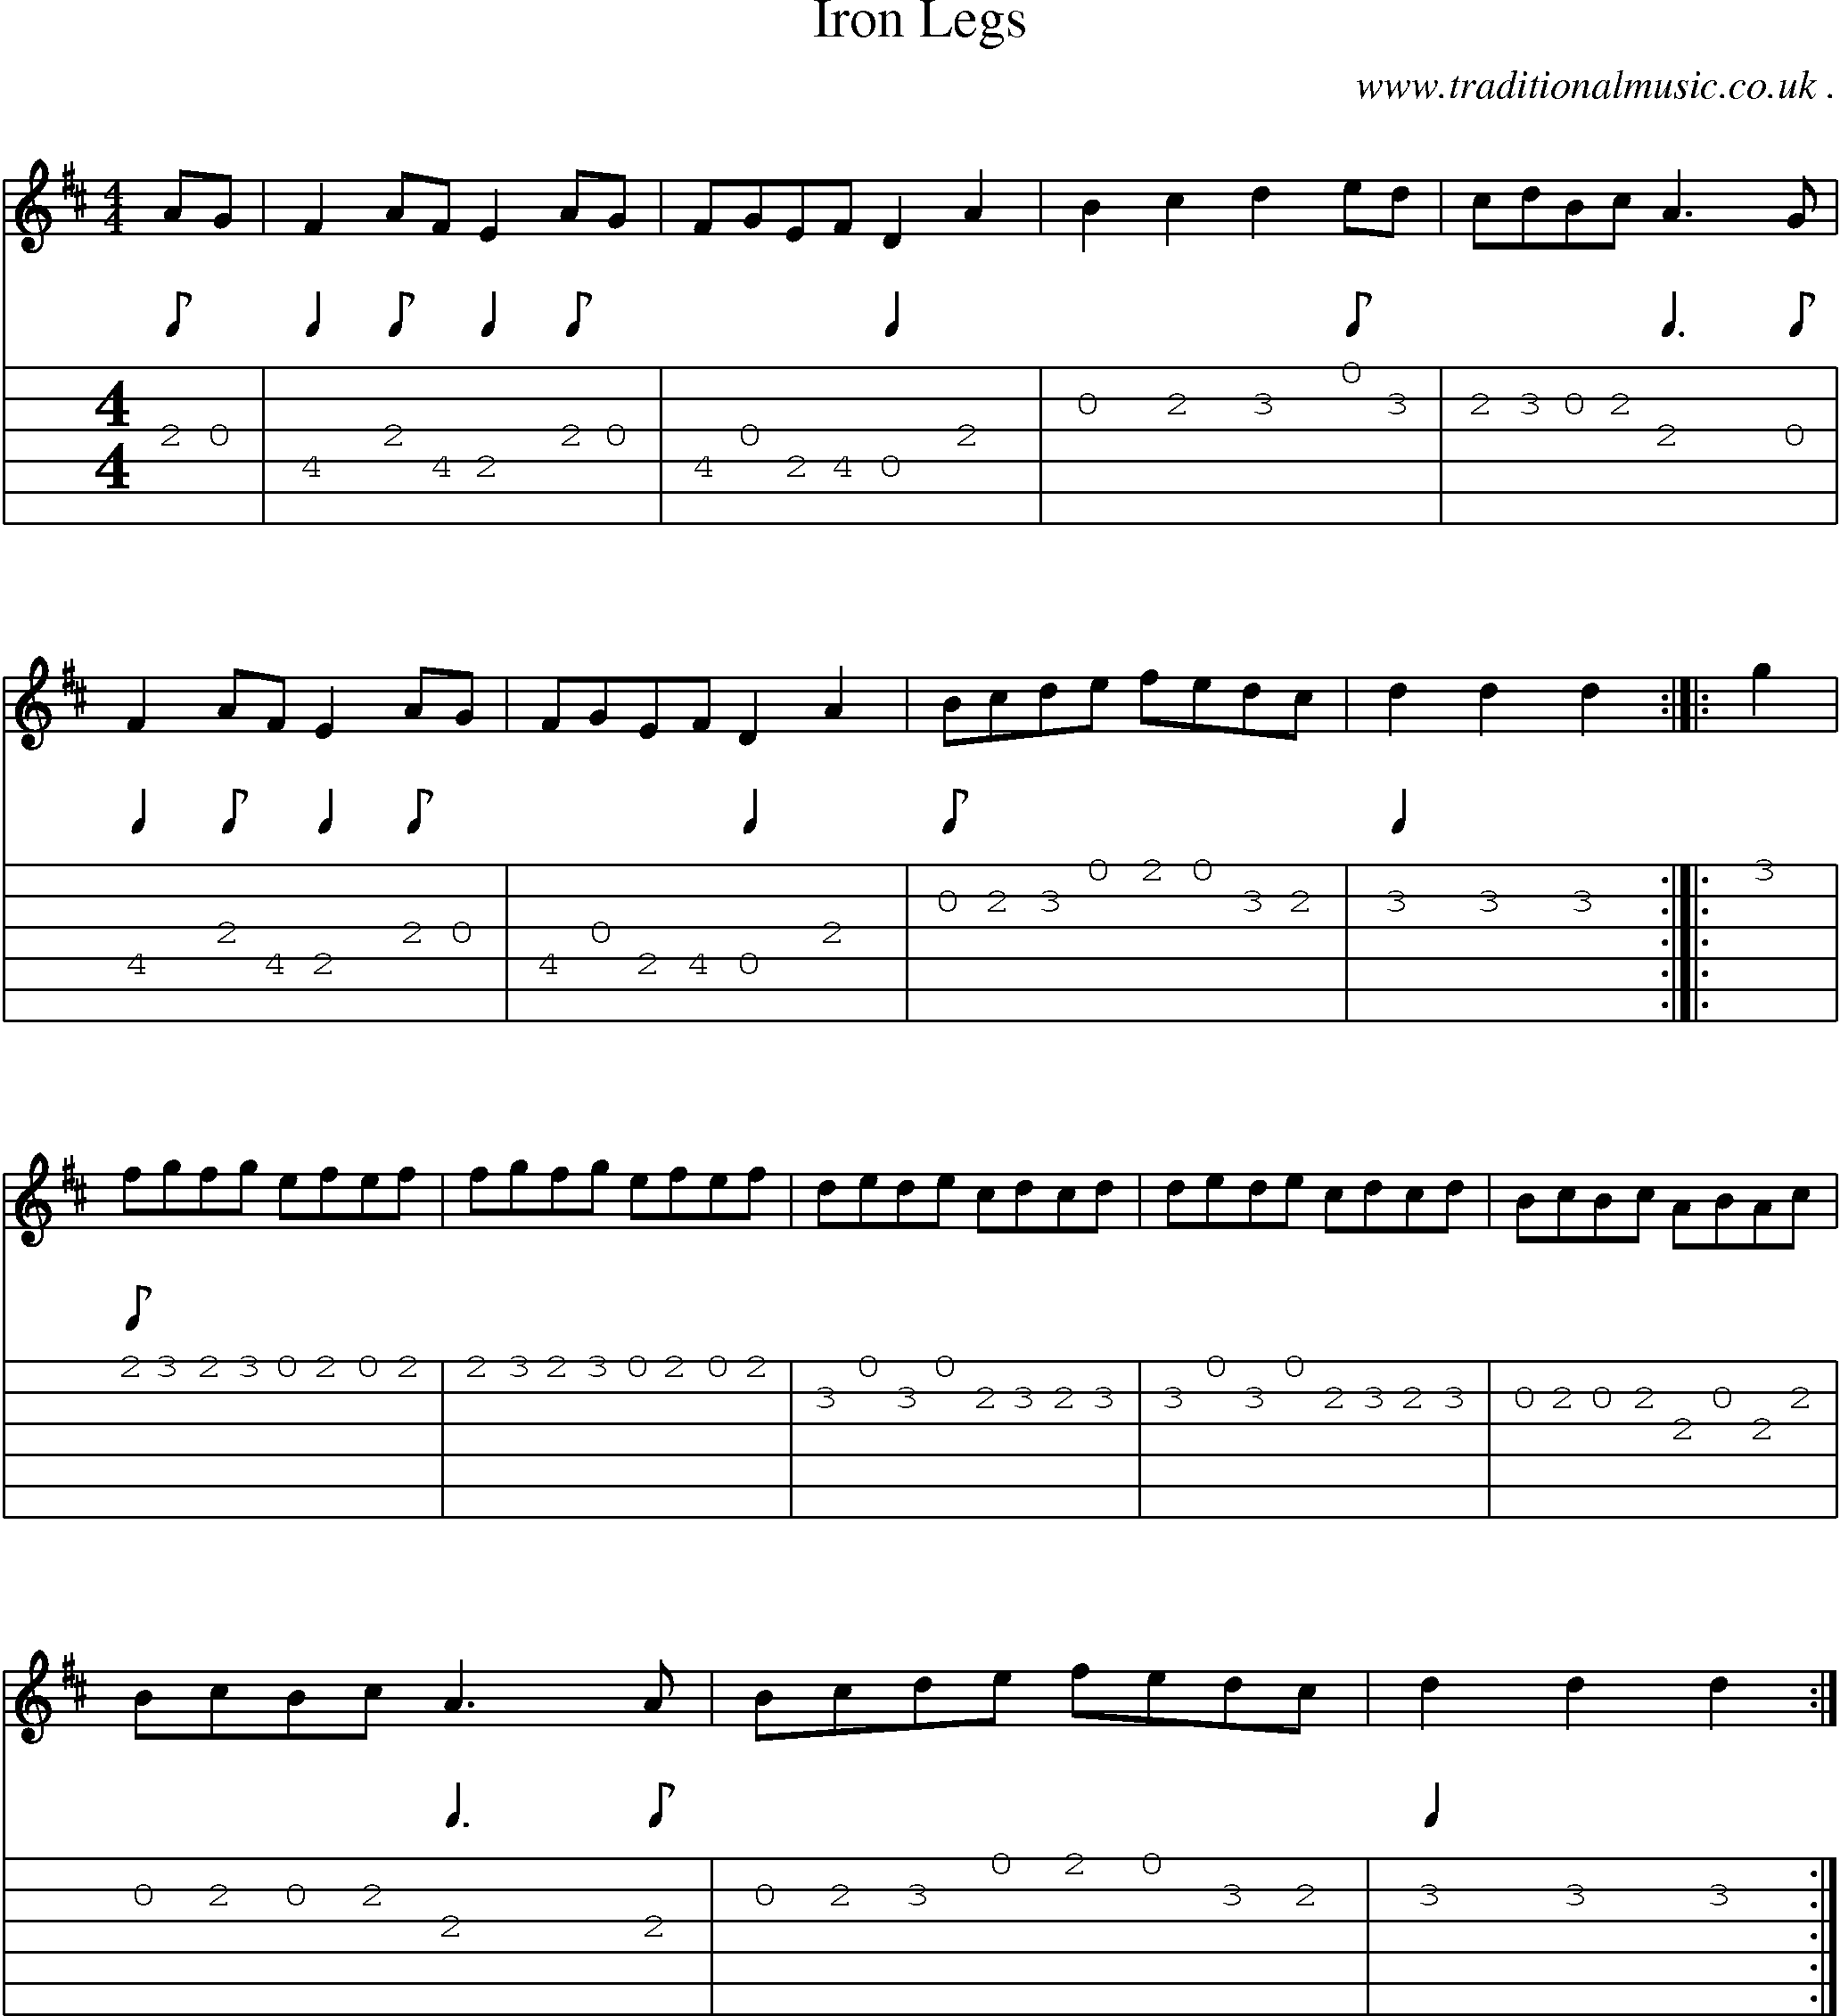 Sheet-Music and Guitar Tabs for Iron Legs